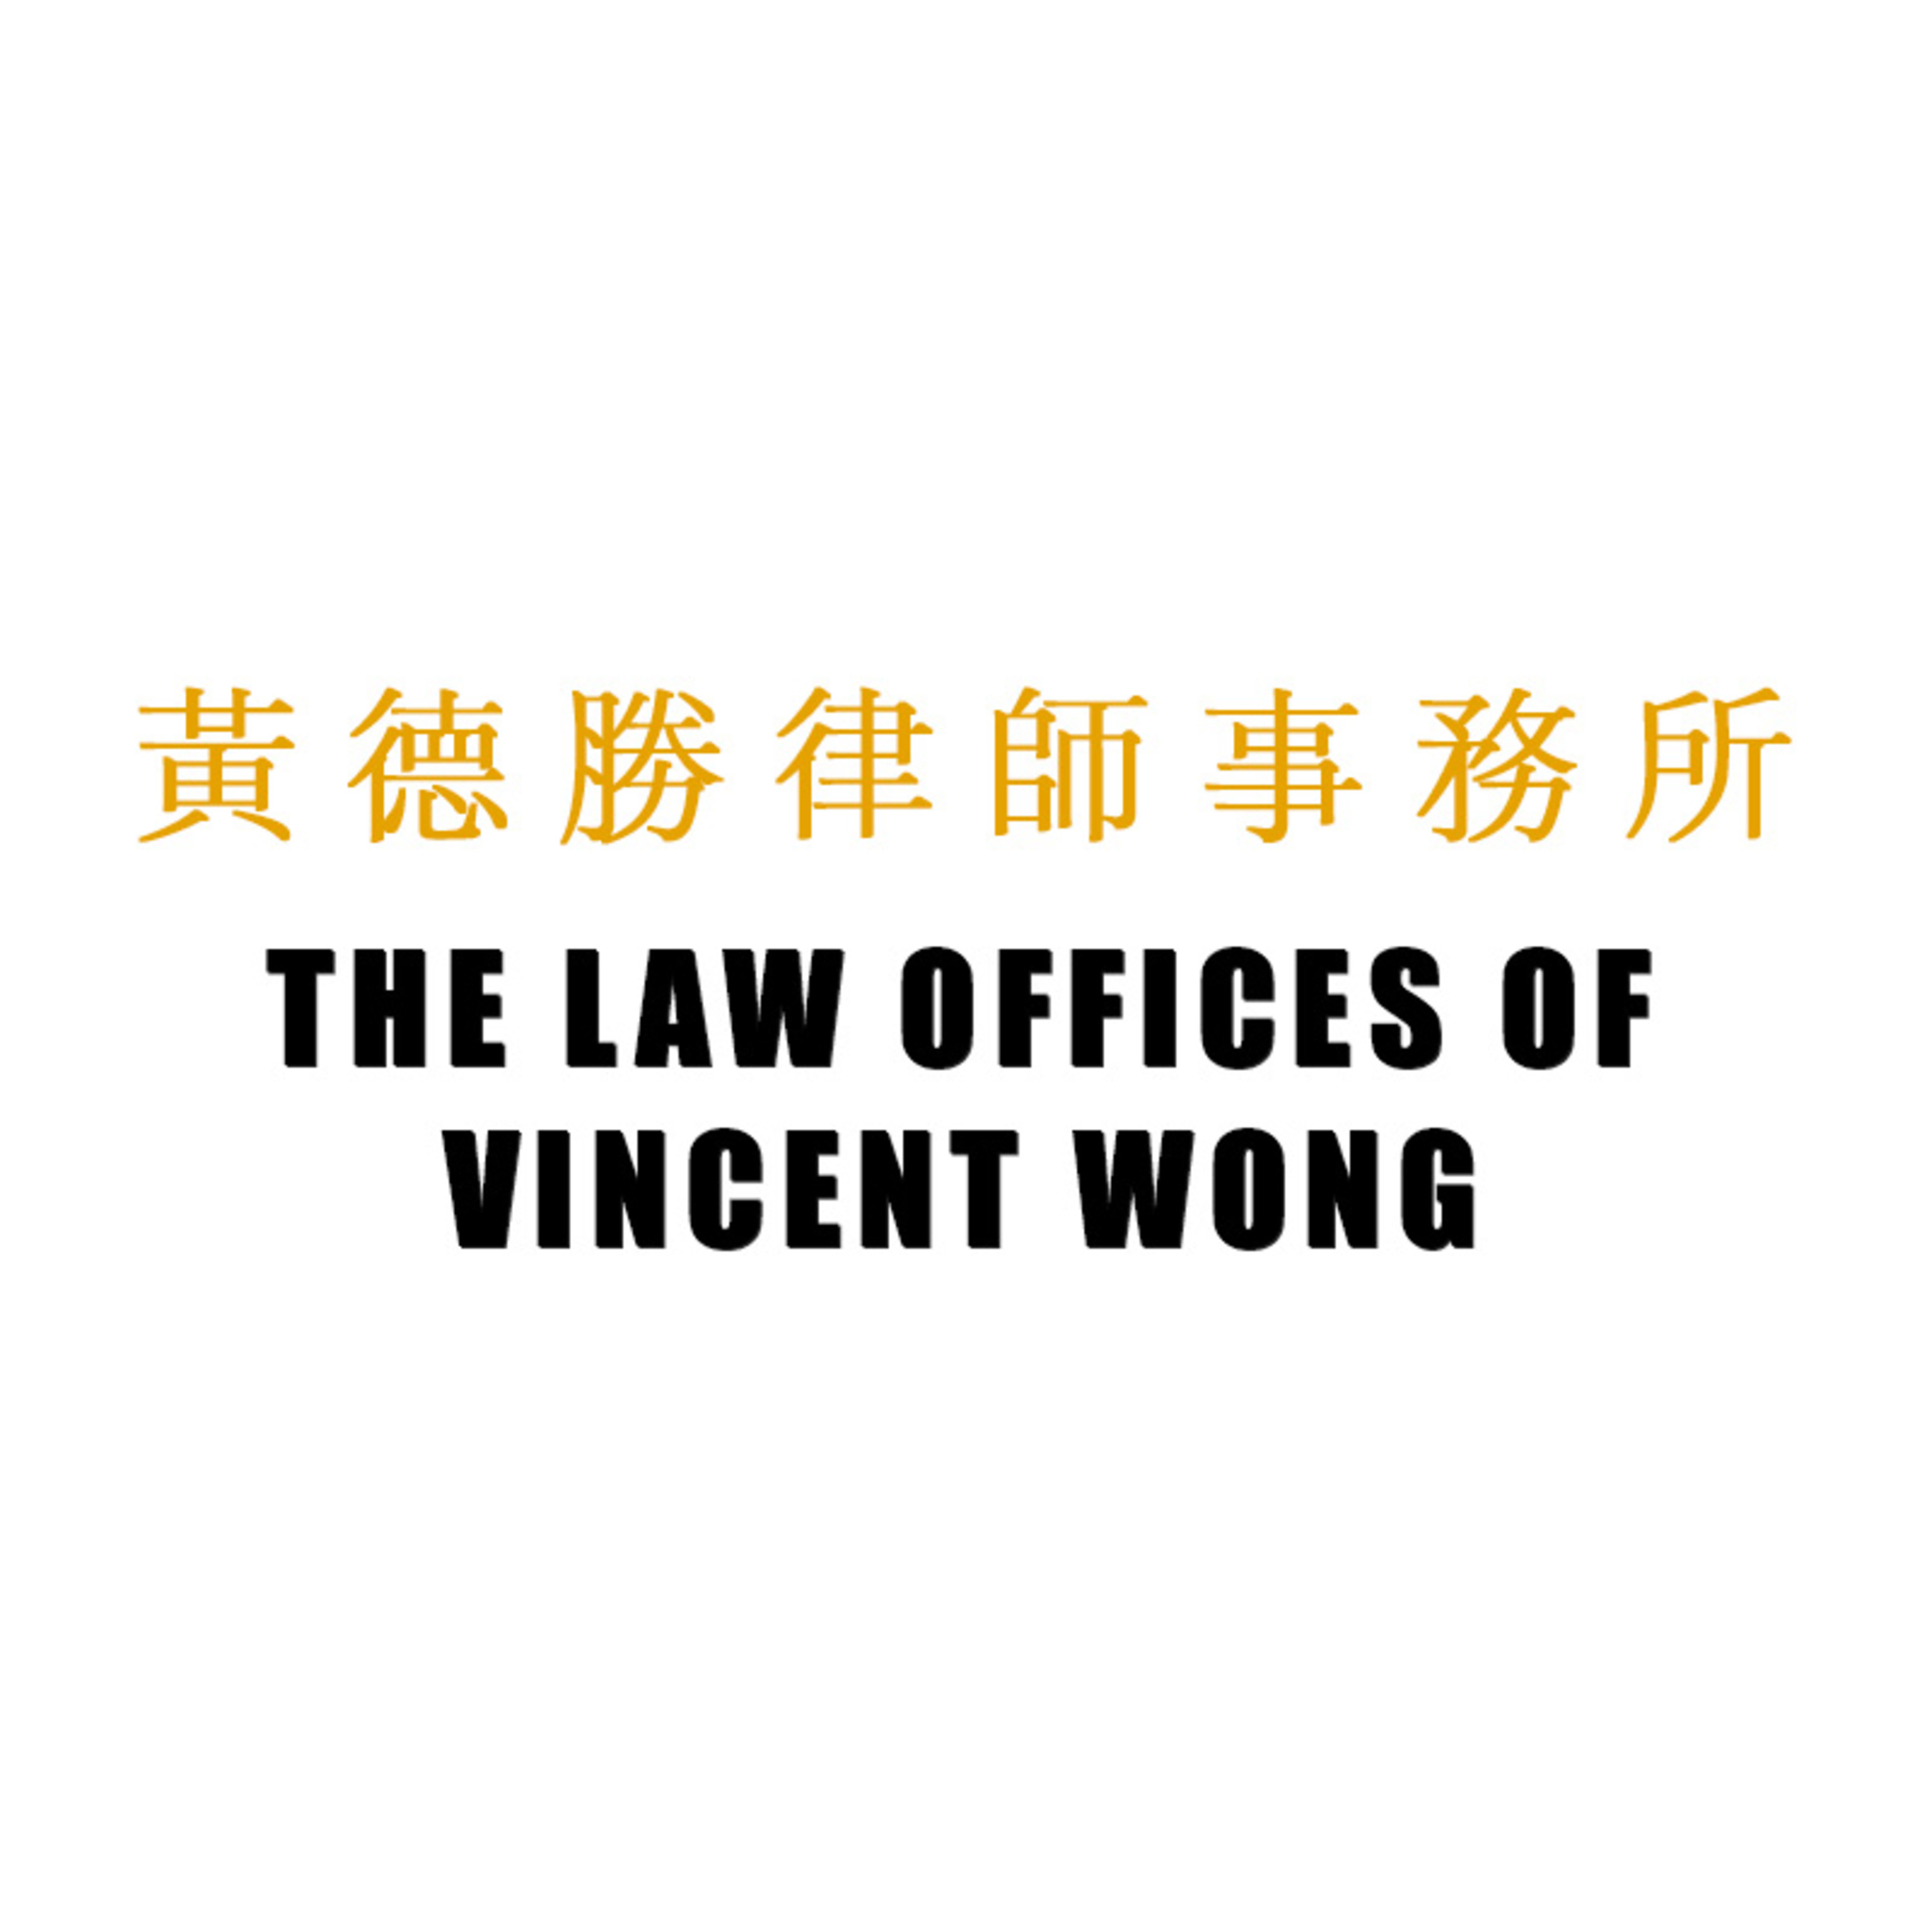 The Law Offices of Vincent Wong logo.